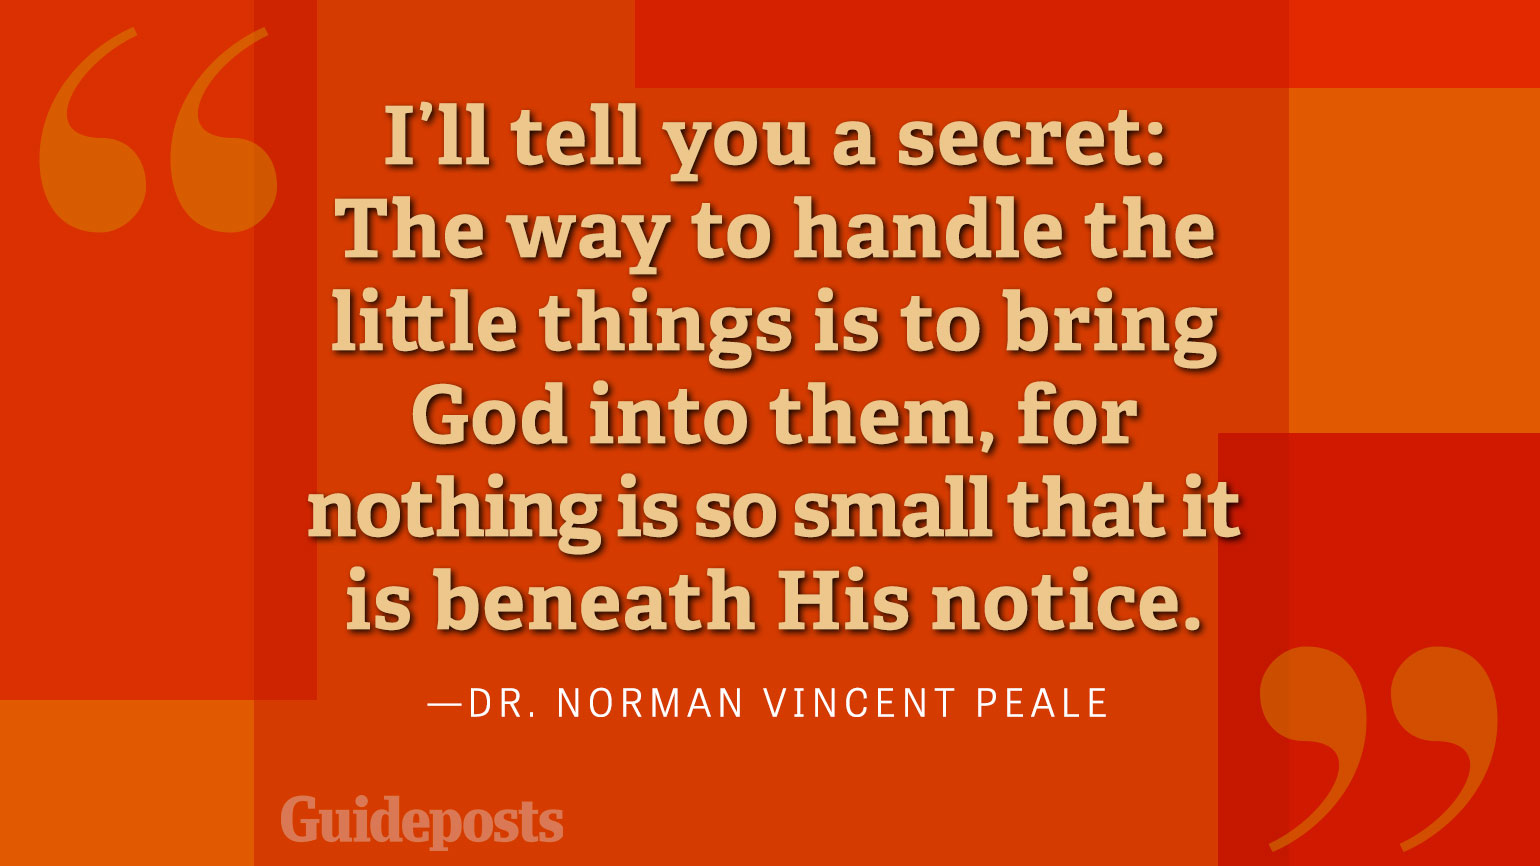 I'll tell you a secret: The way to handle the little things is to bring God into them, for nothing is so small that it is beneath His notice.